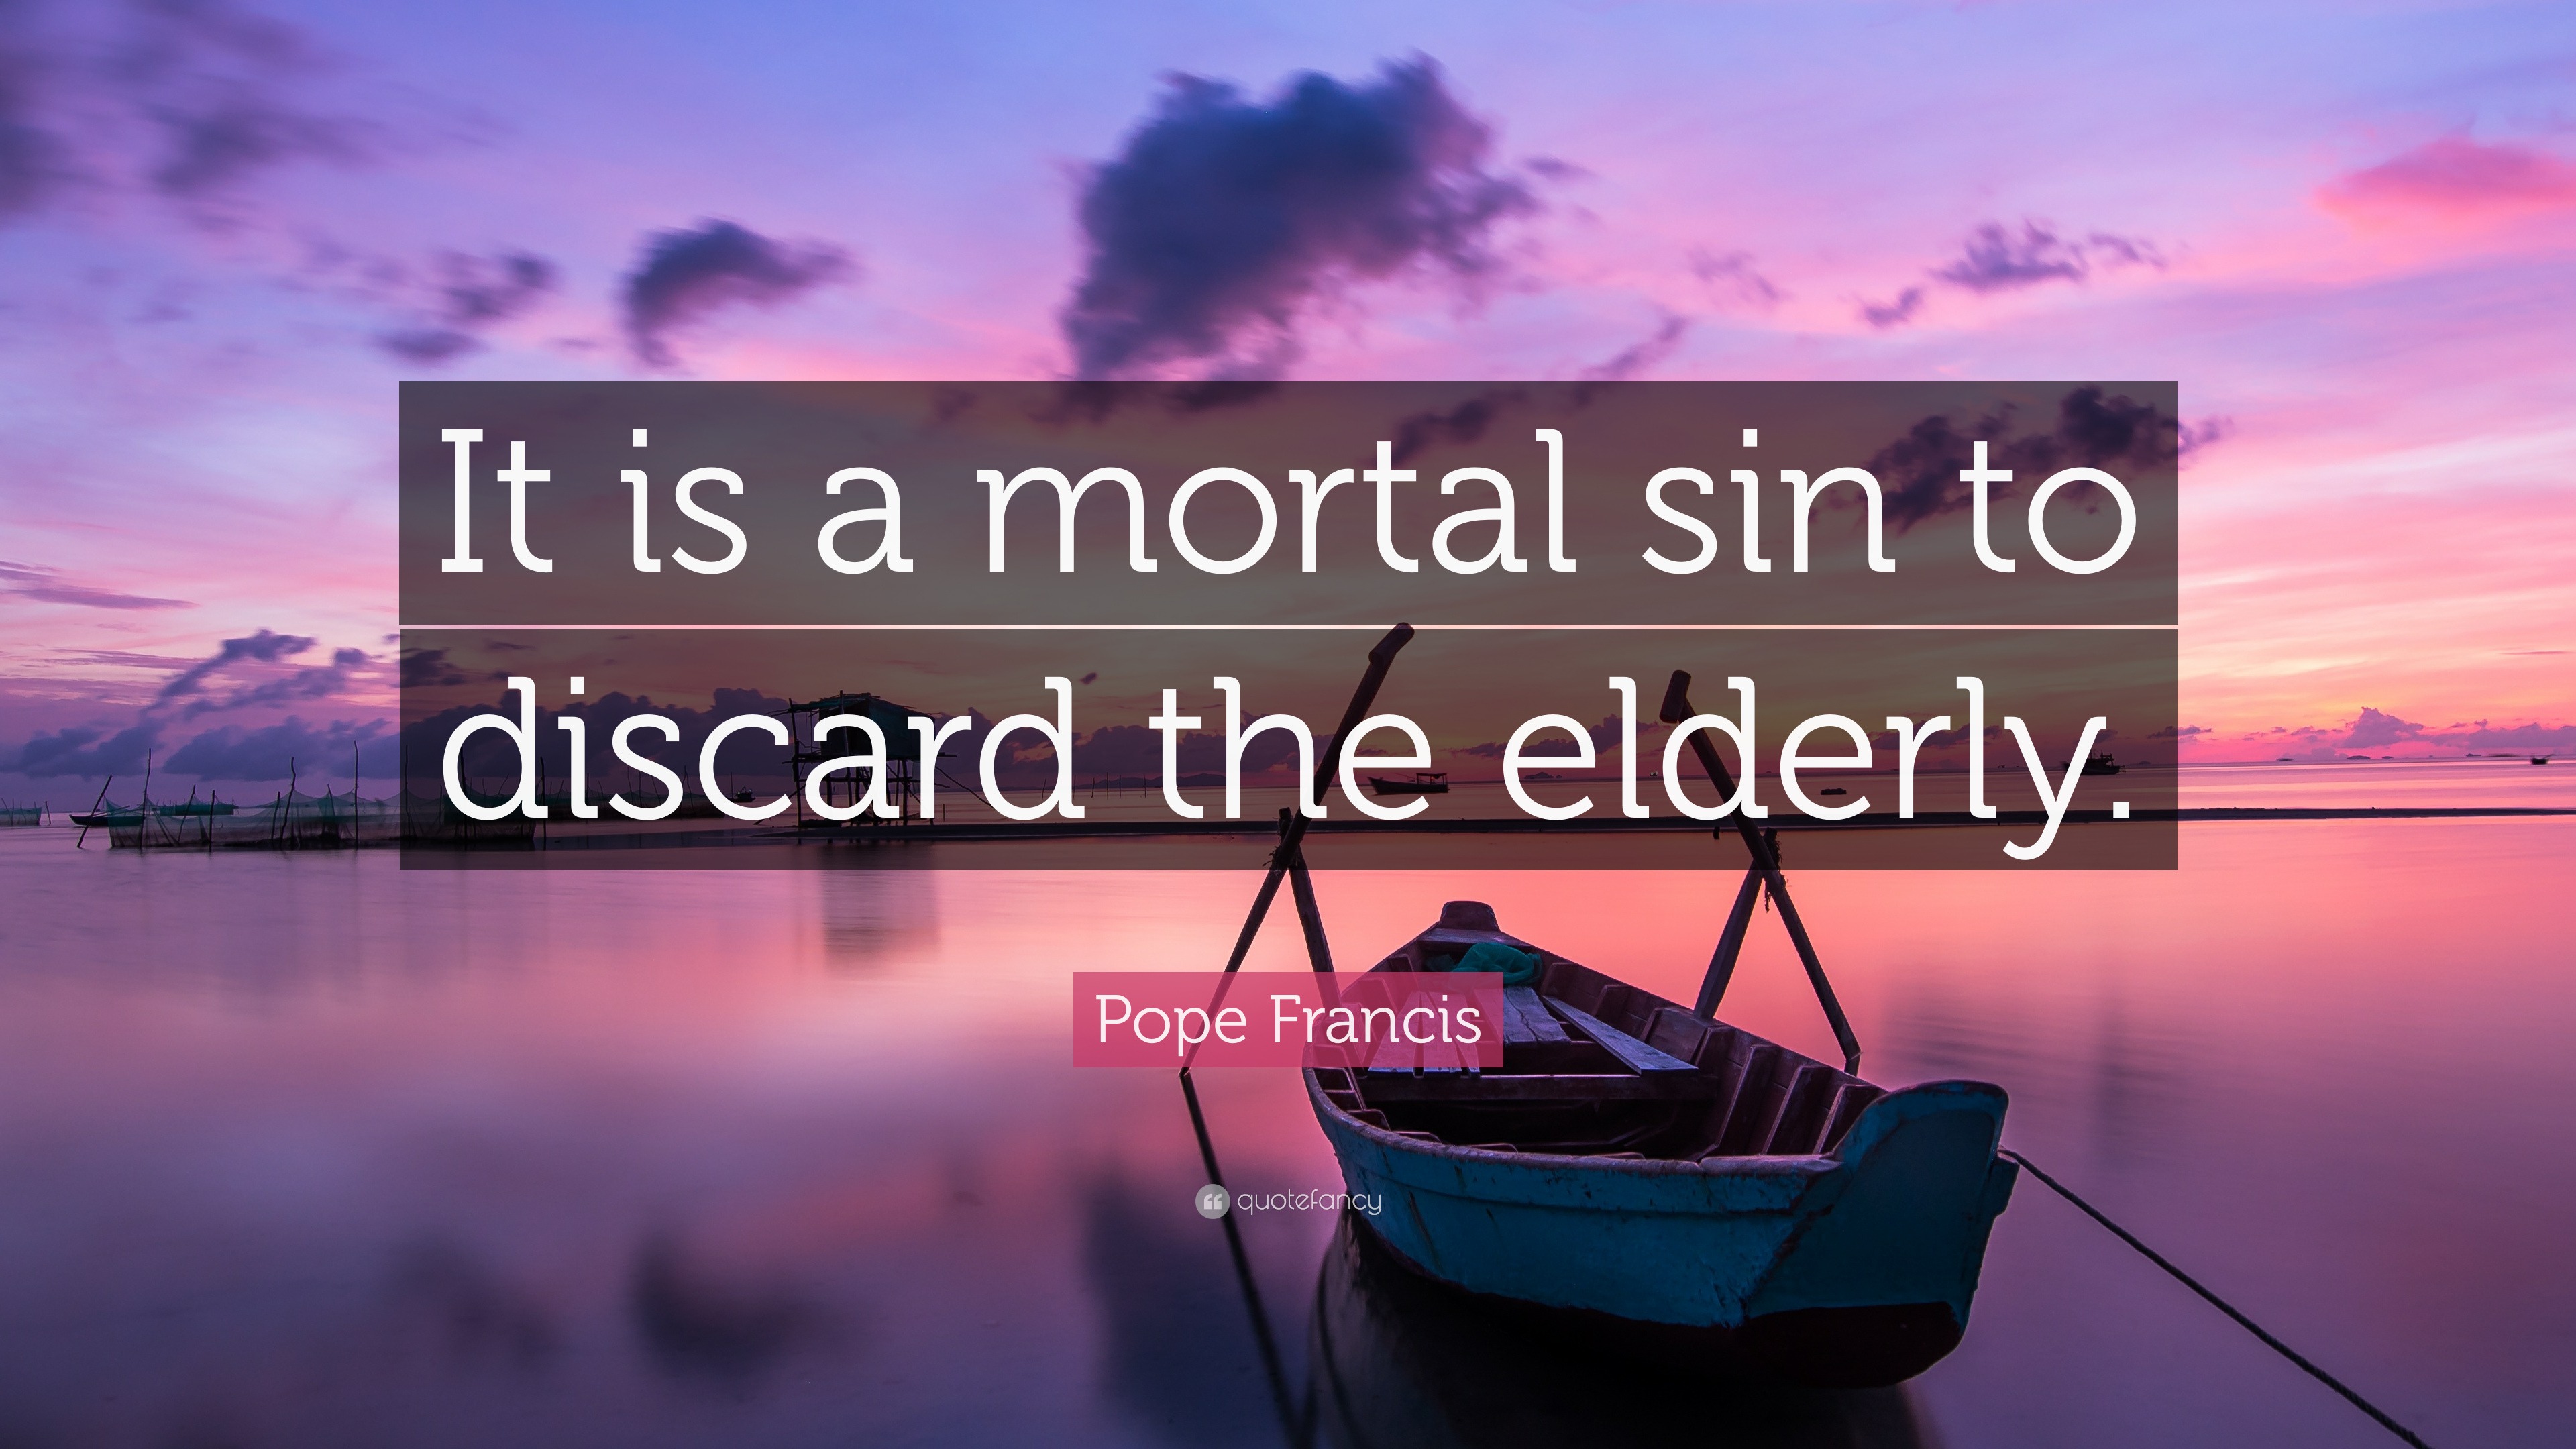 Pope Francis Quote “it Is A Mortal Sin To Discard The Elderly”